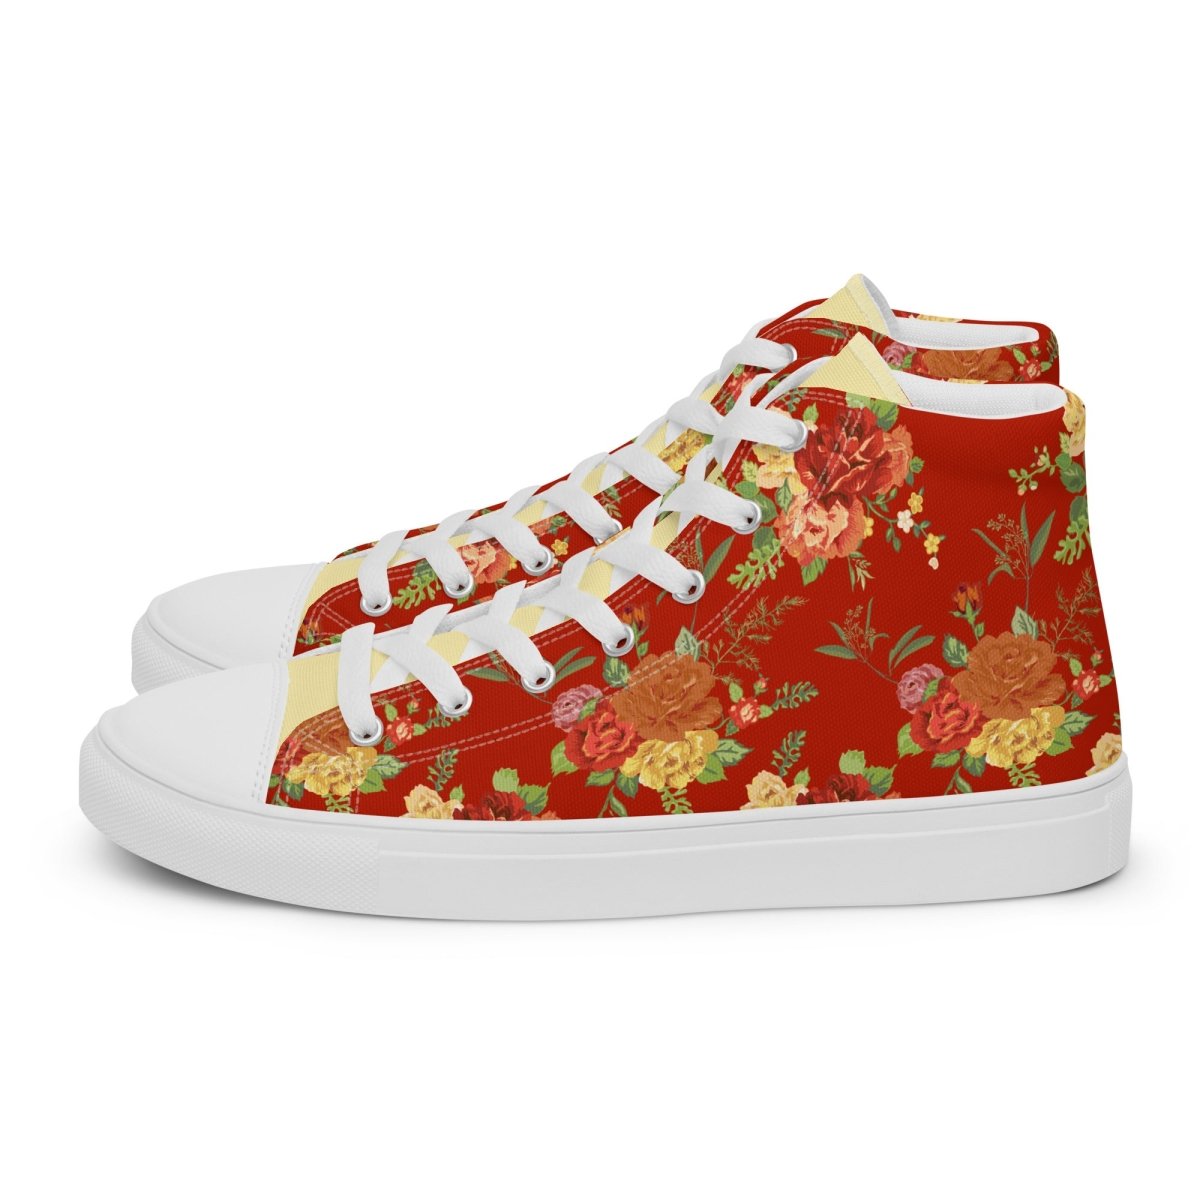 Women’s Red Floral Sneakers - DoggyLoveandMore